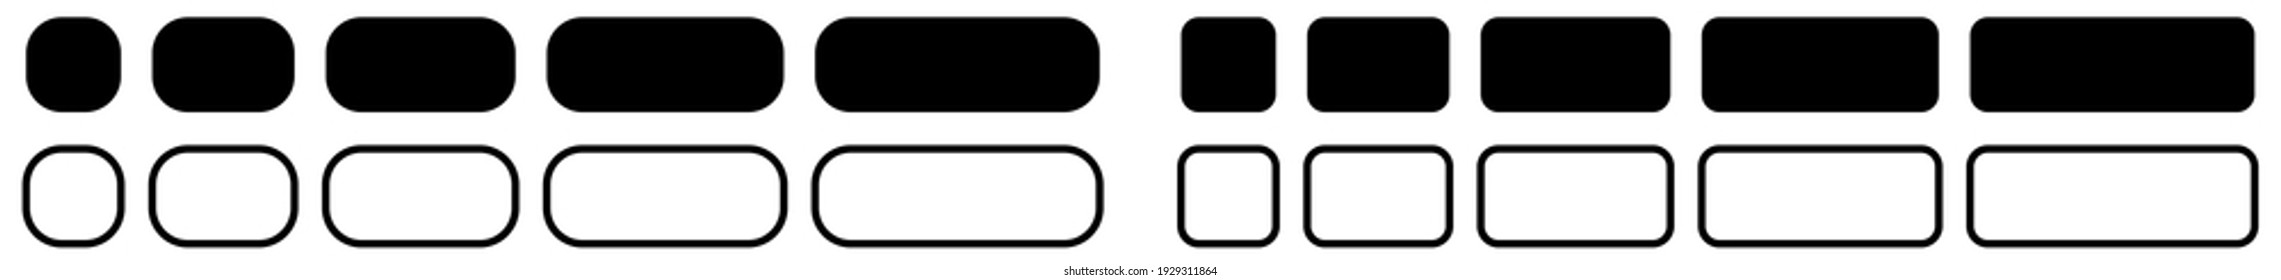 Simple Rounded Corners Rectangles Icons Set - Can Be Used As Buttons